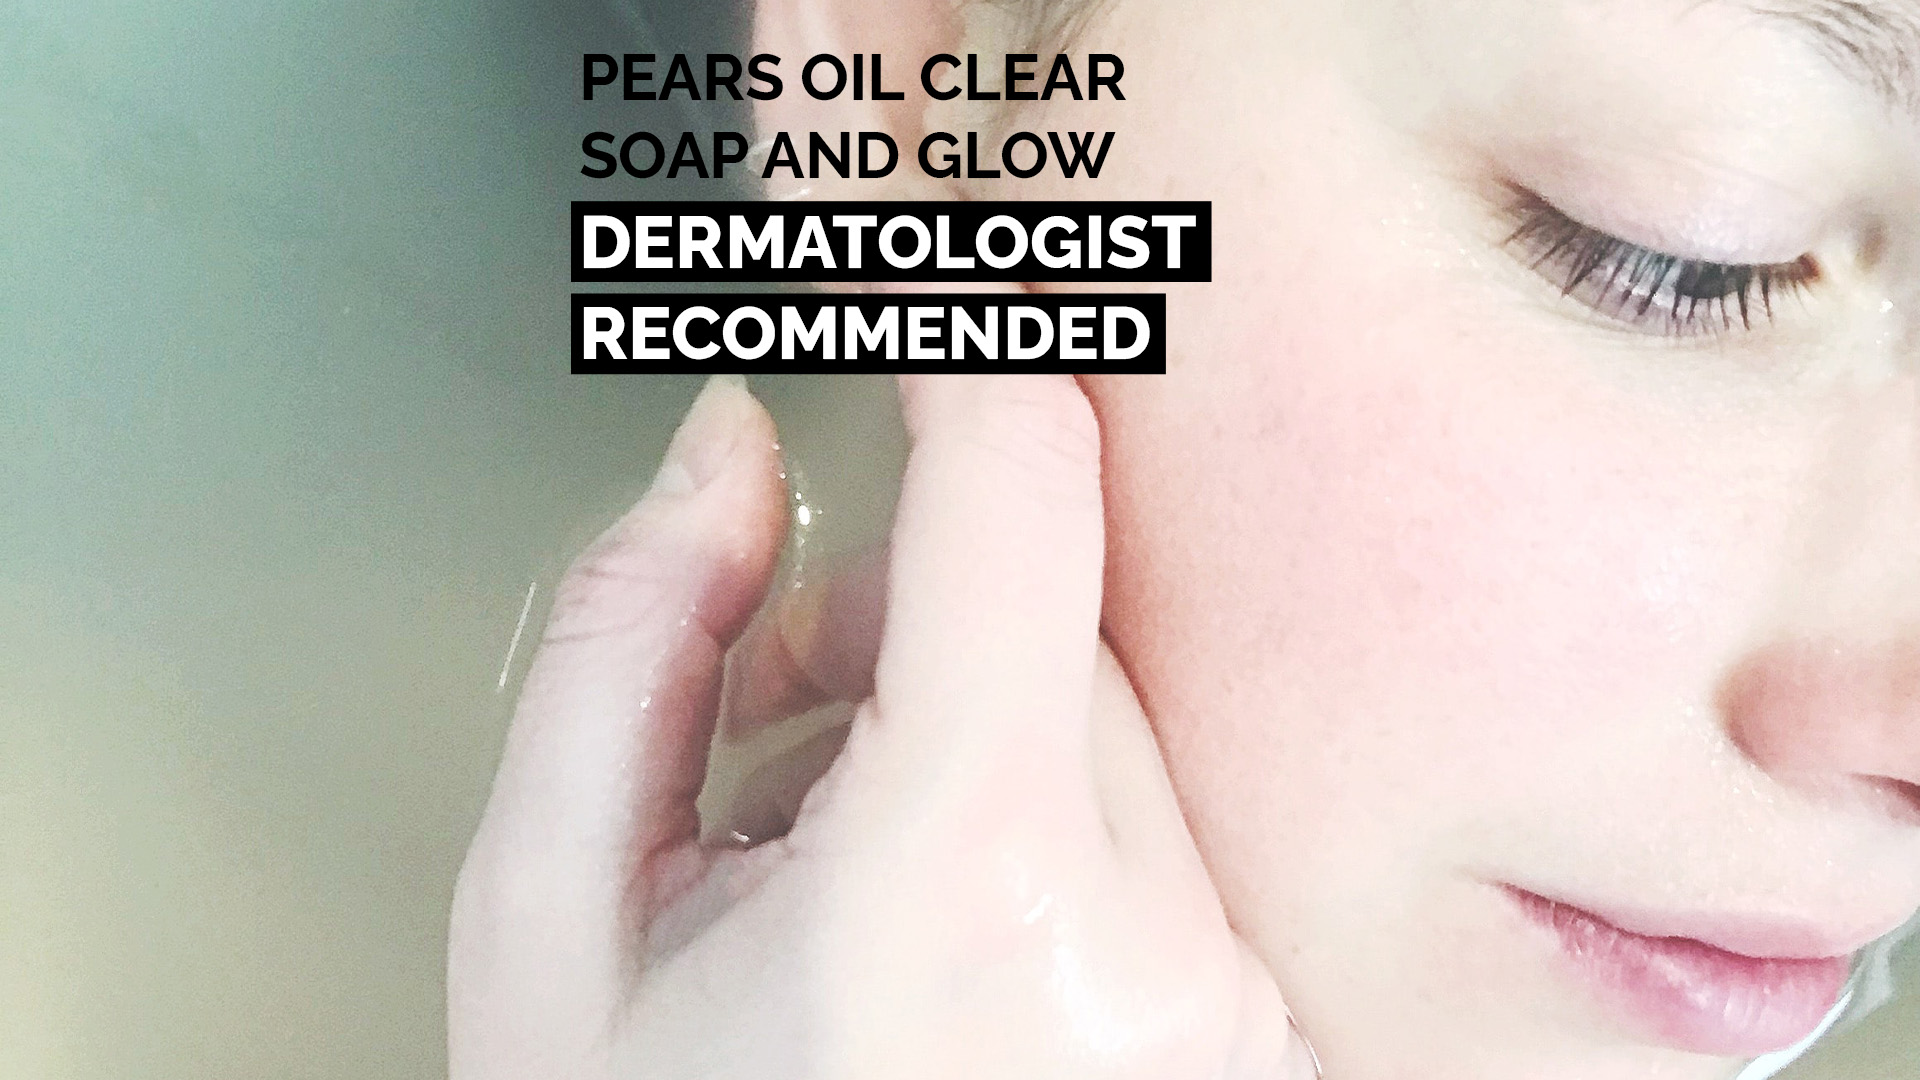 Pears Oil Clear Soap And Glow-Dermatologist Recommended